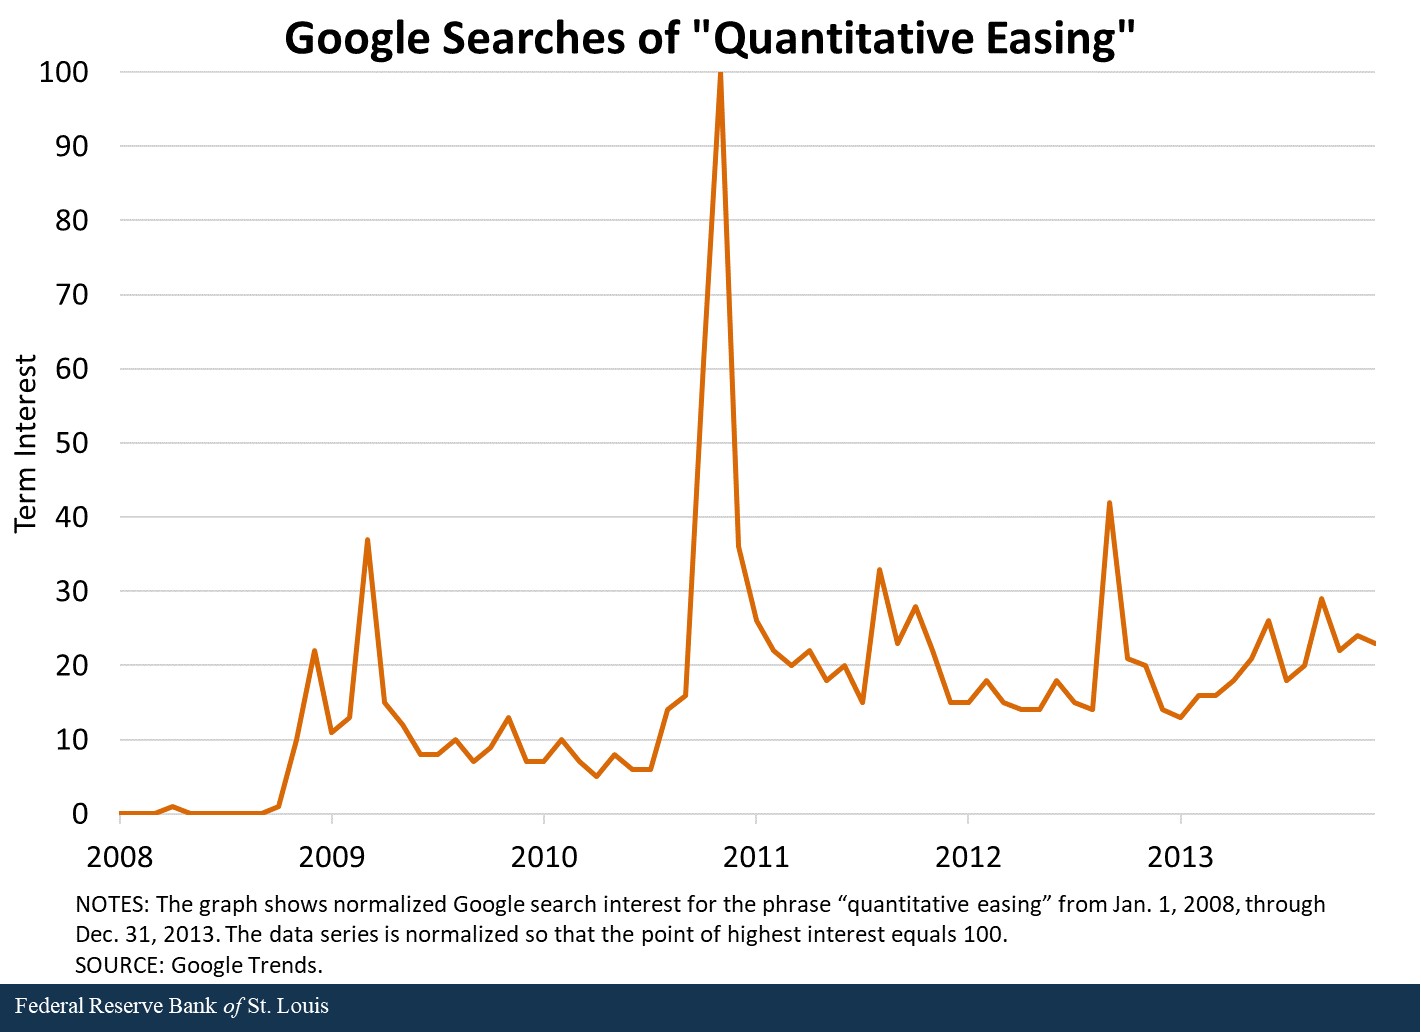 Line-graph showing normalized Google search interest for the phrase "quantitative easing" from Jan. 1, 2008 - Dec. 21, 2013